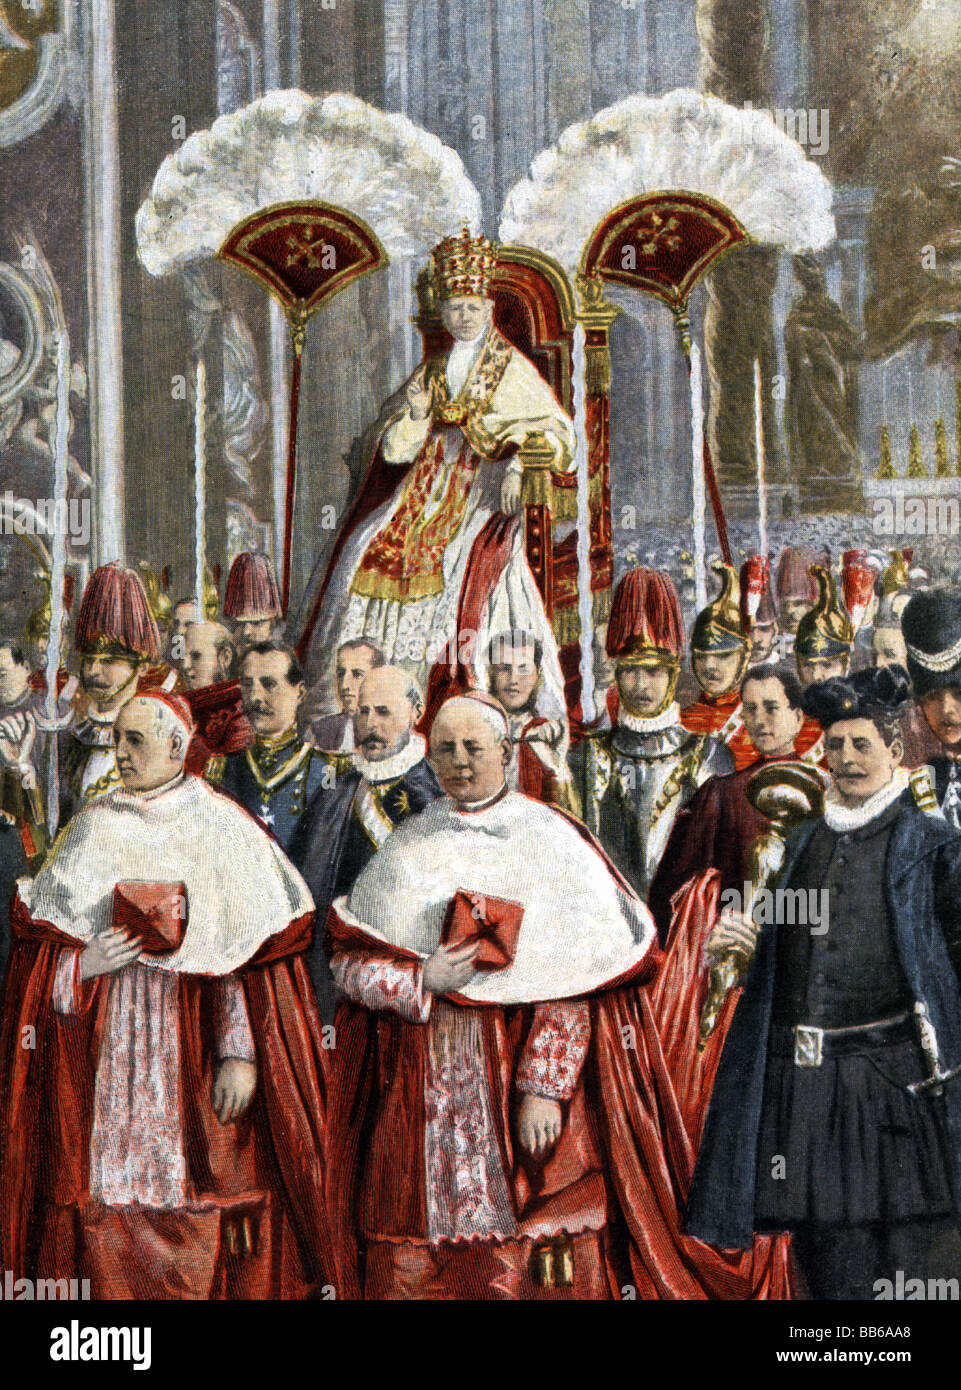 Leo XIII (Vincenzo Gioacchino Pecci), 2.3.1810 - 20.6.1903, Pope 20.2.1878 - 20.6.1903, at a procession, Saint Peters Cathedral, Rome, after painting by E. Nardi, 2nd half 19th century, , Stock Photo